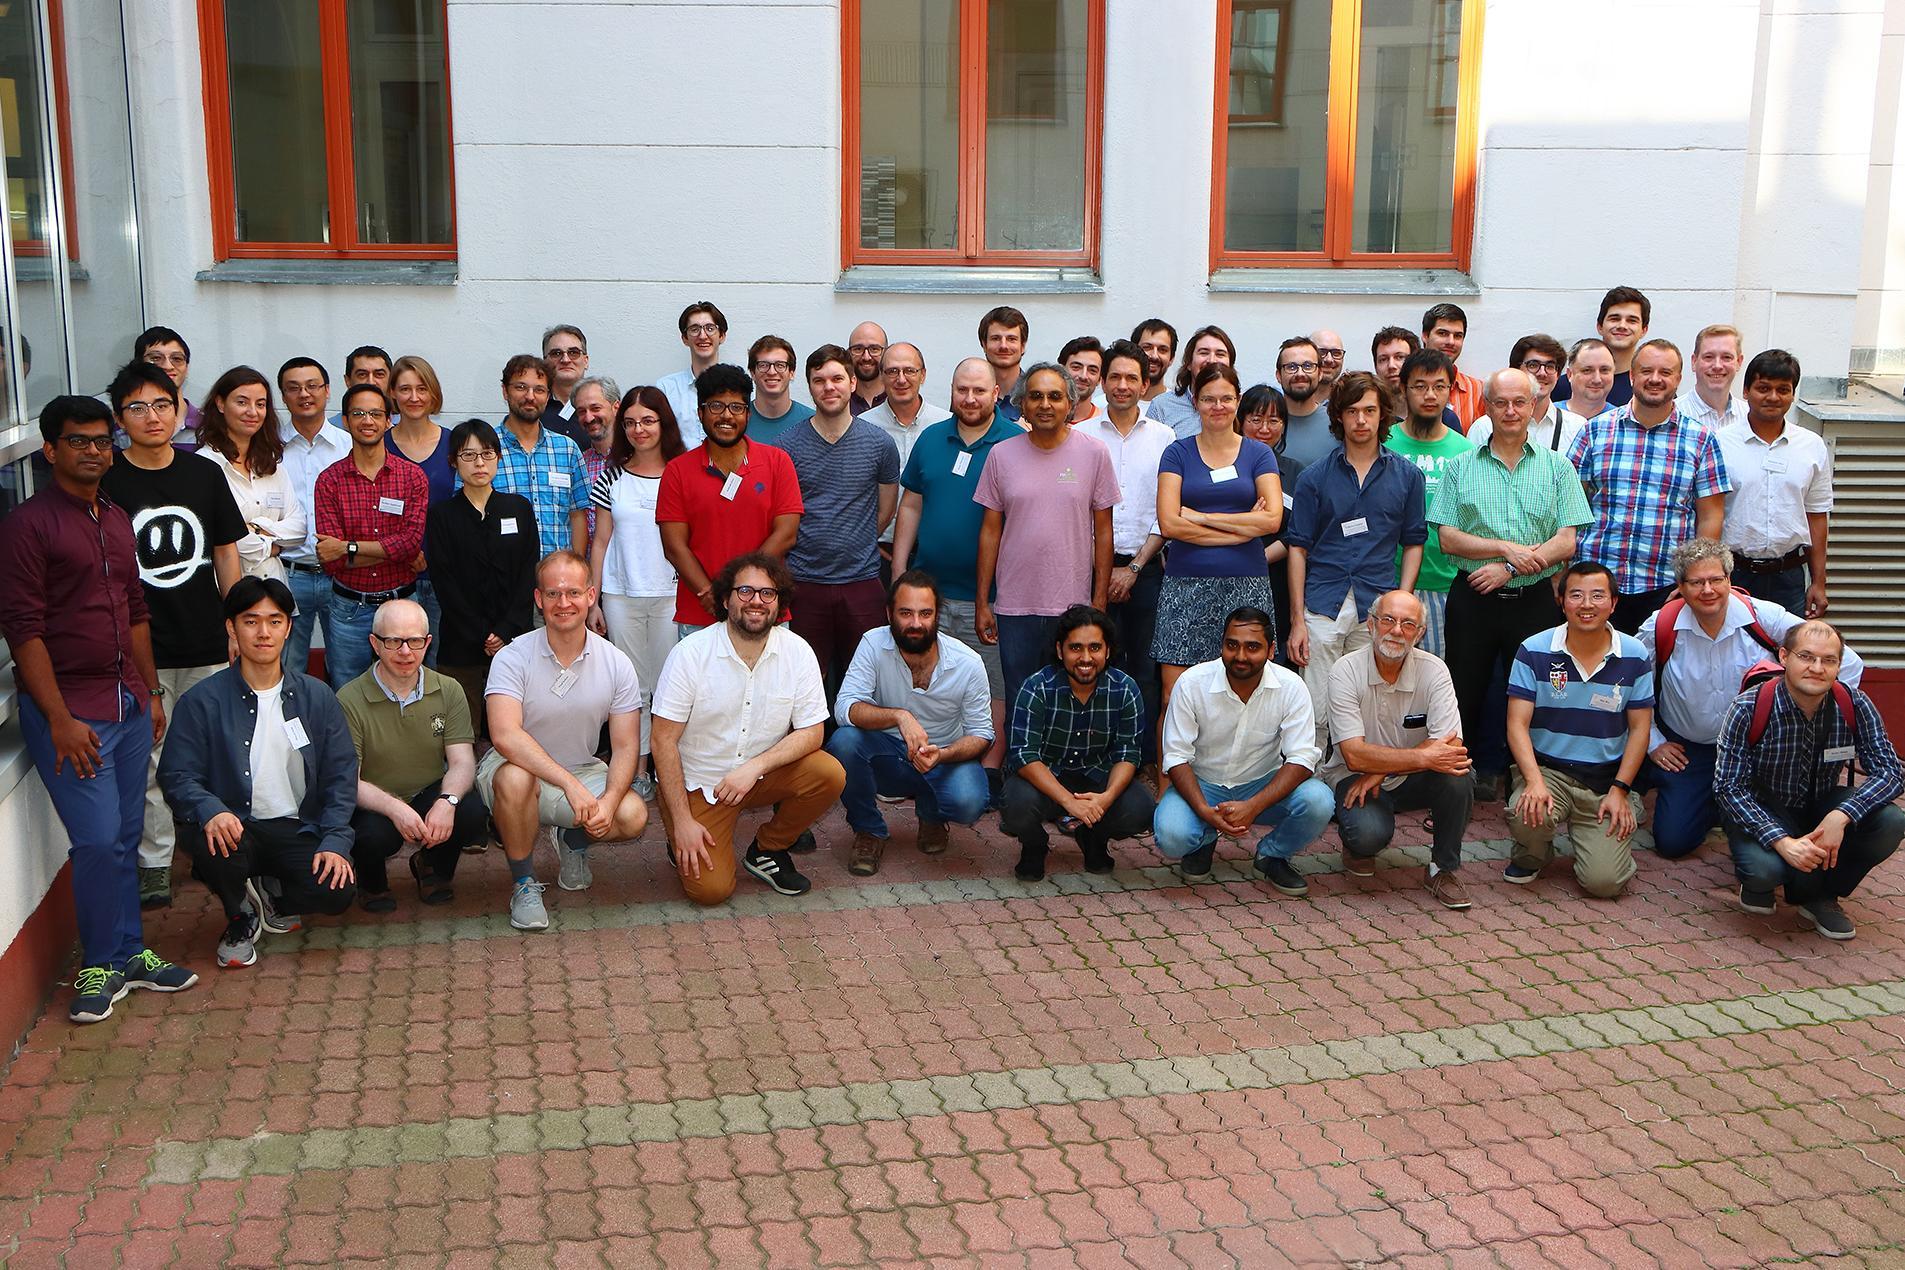 group photo of the conference